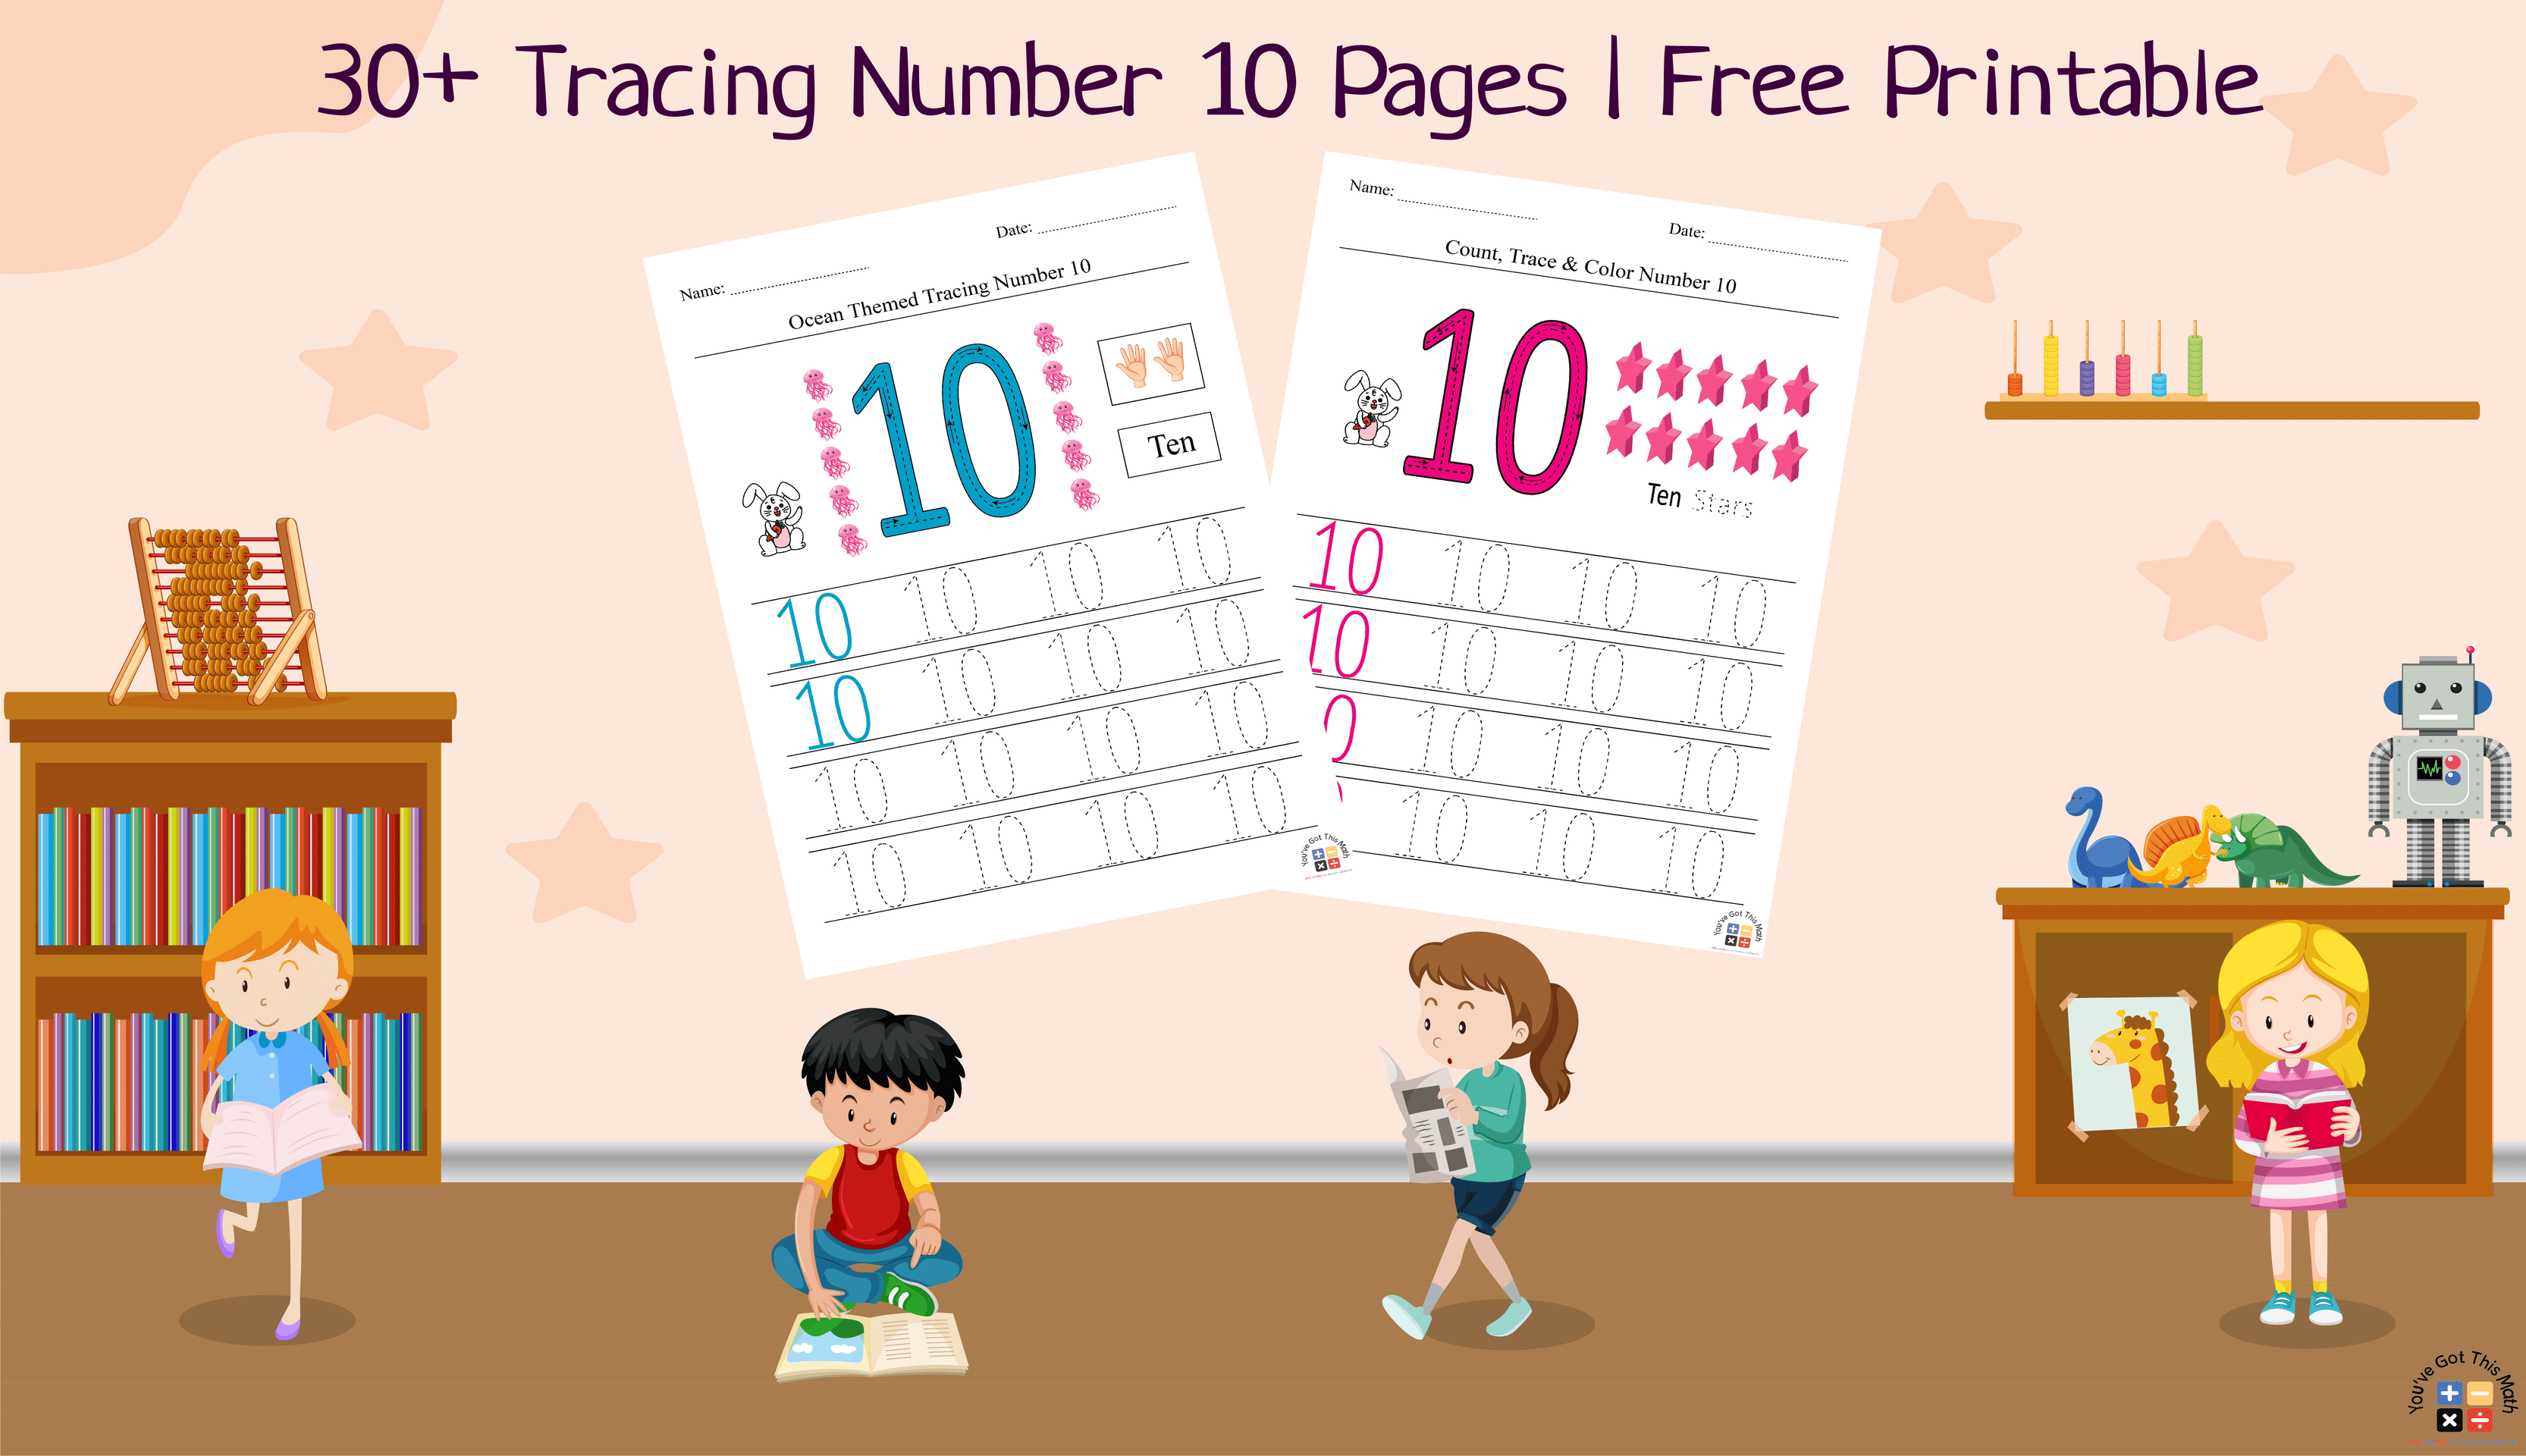 30+ Tracing Number 10 Pages | Free Printable